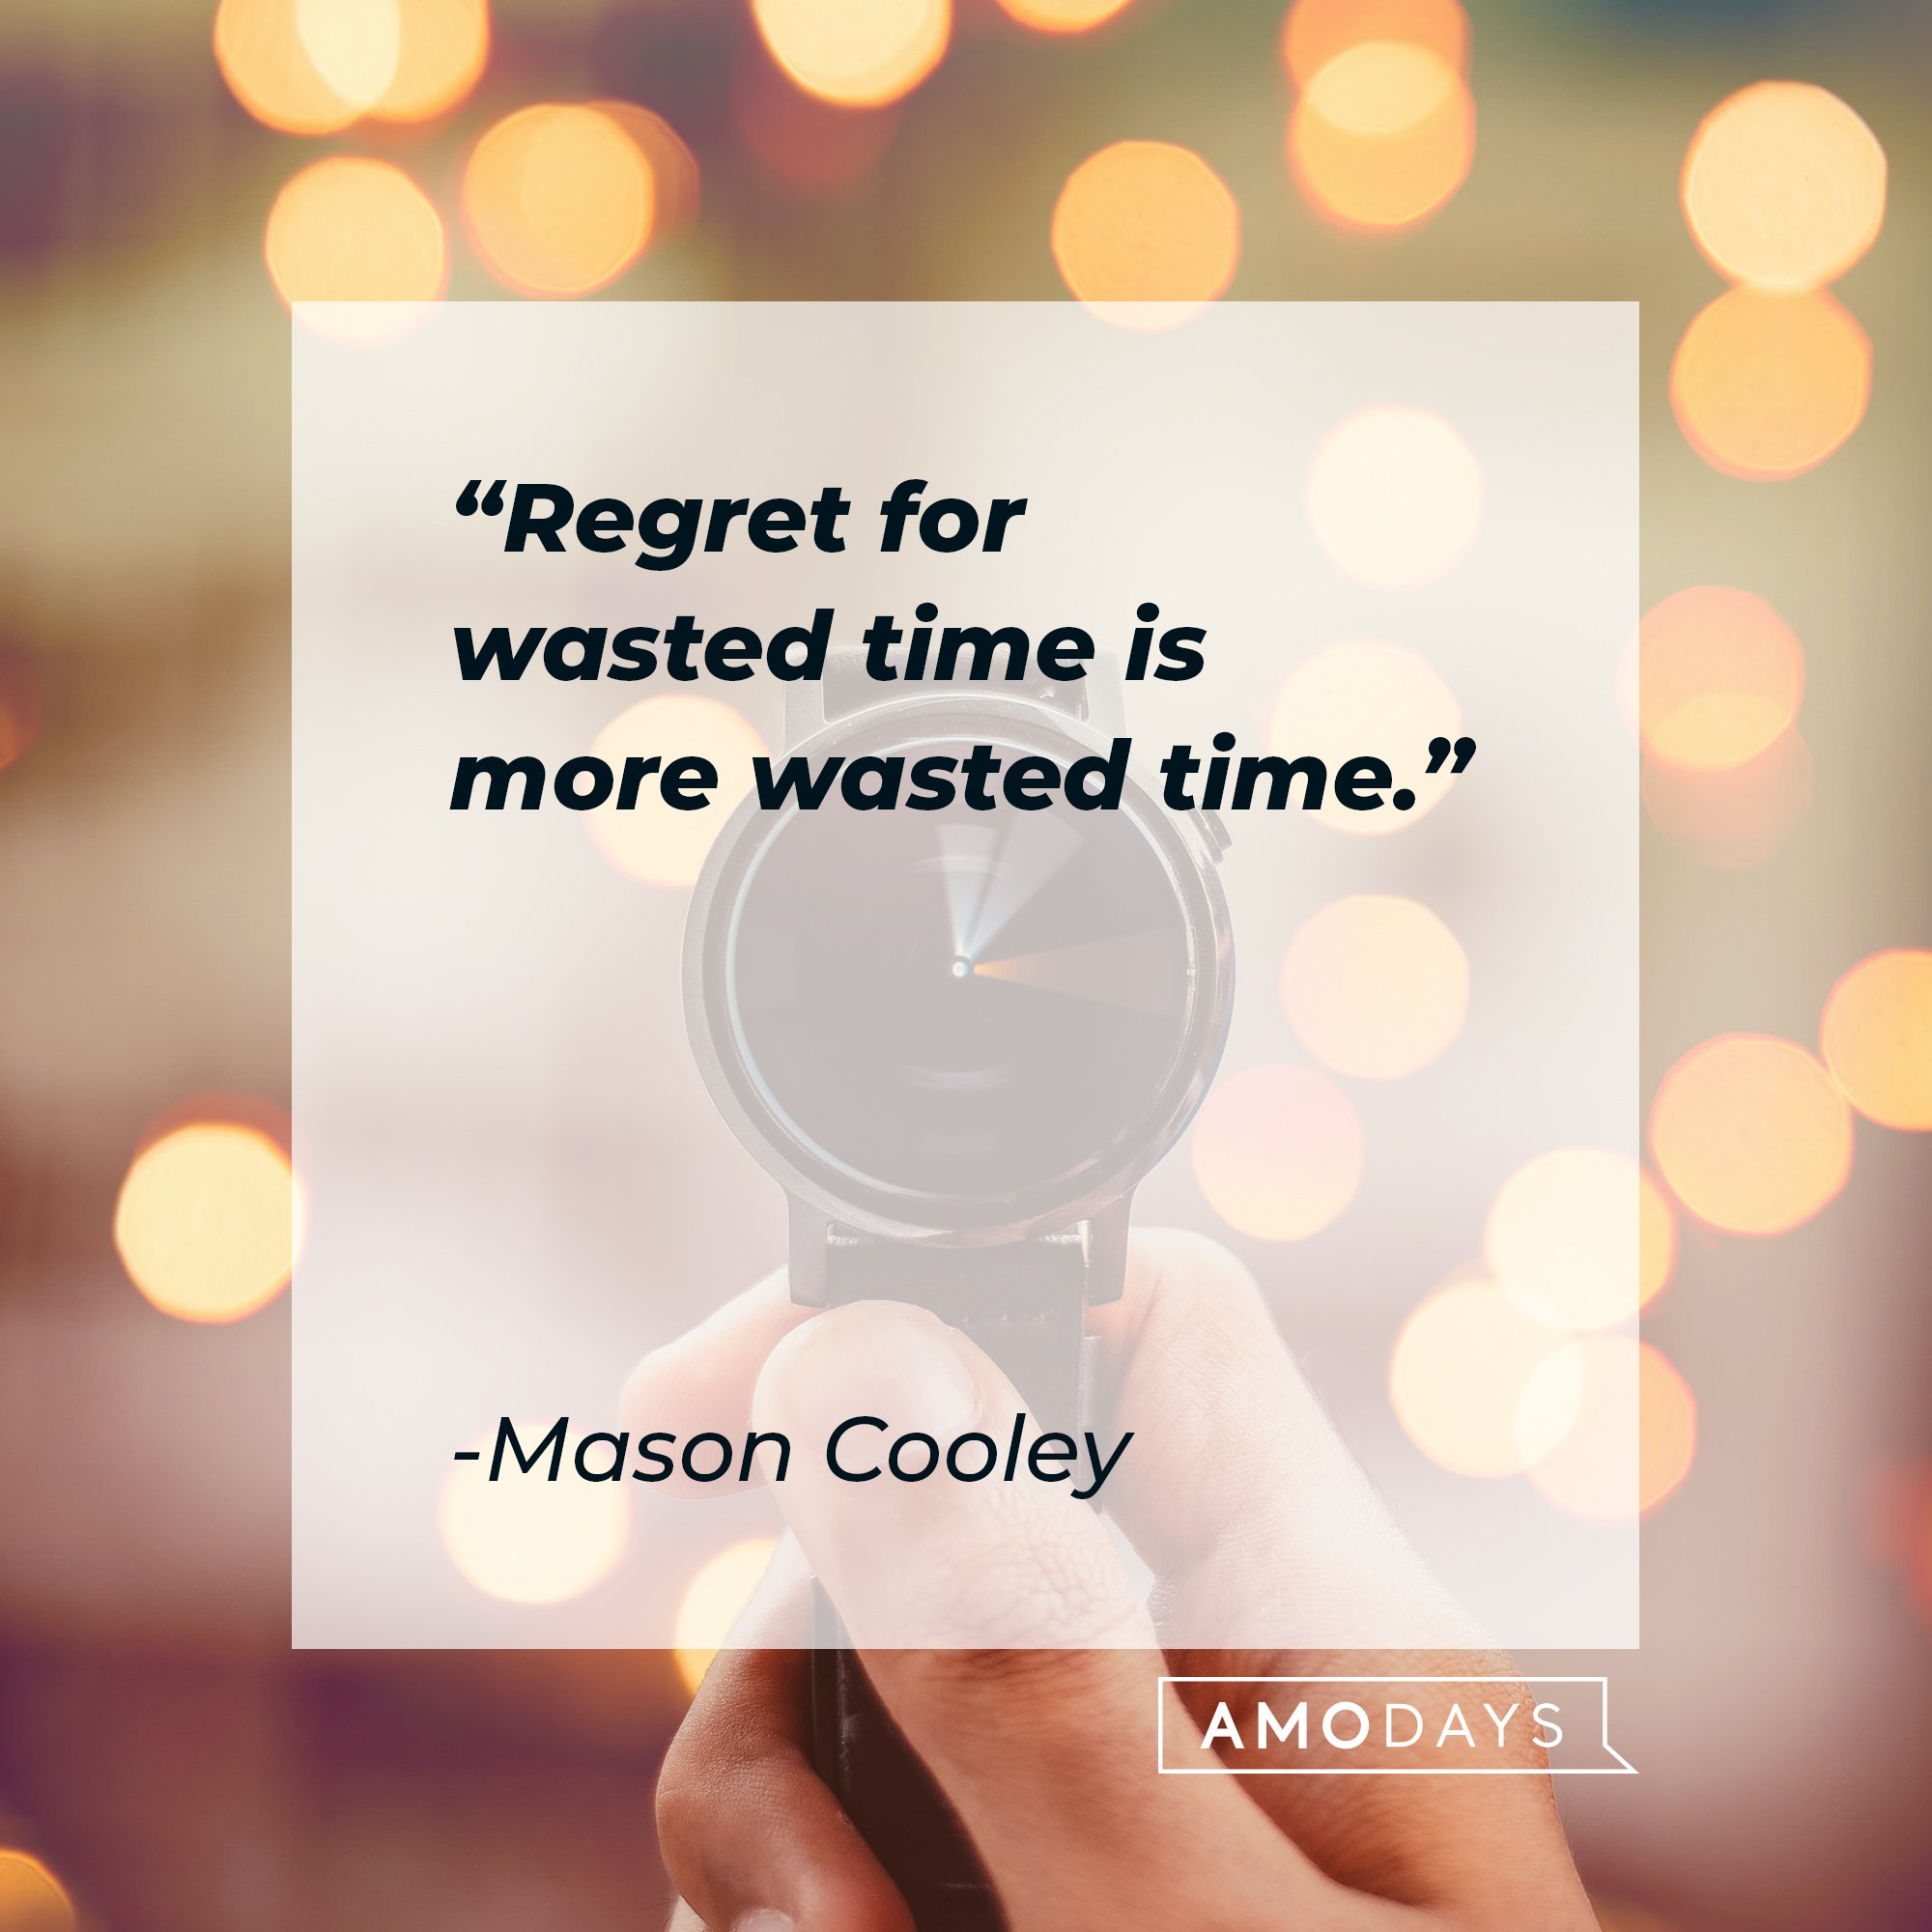 Mason Cooley’s quote: "Regret for wasted time is more wasted time." | Image: AmoDays   